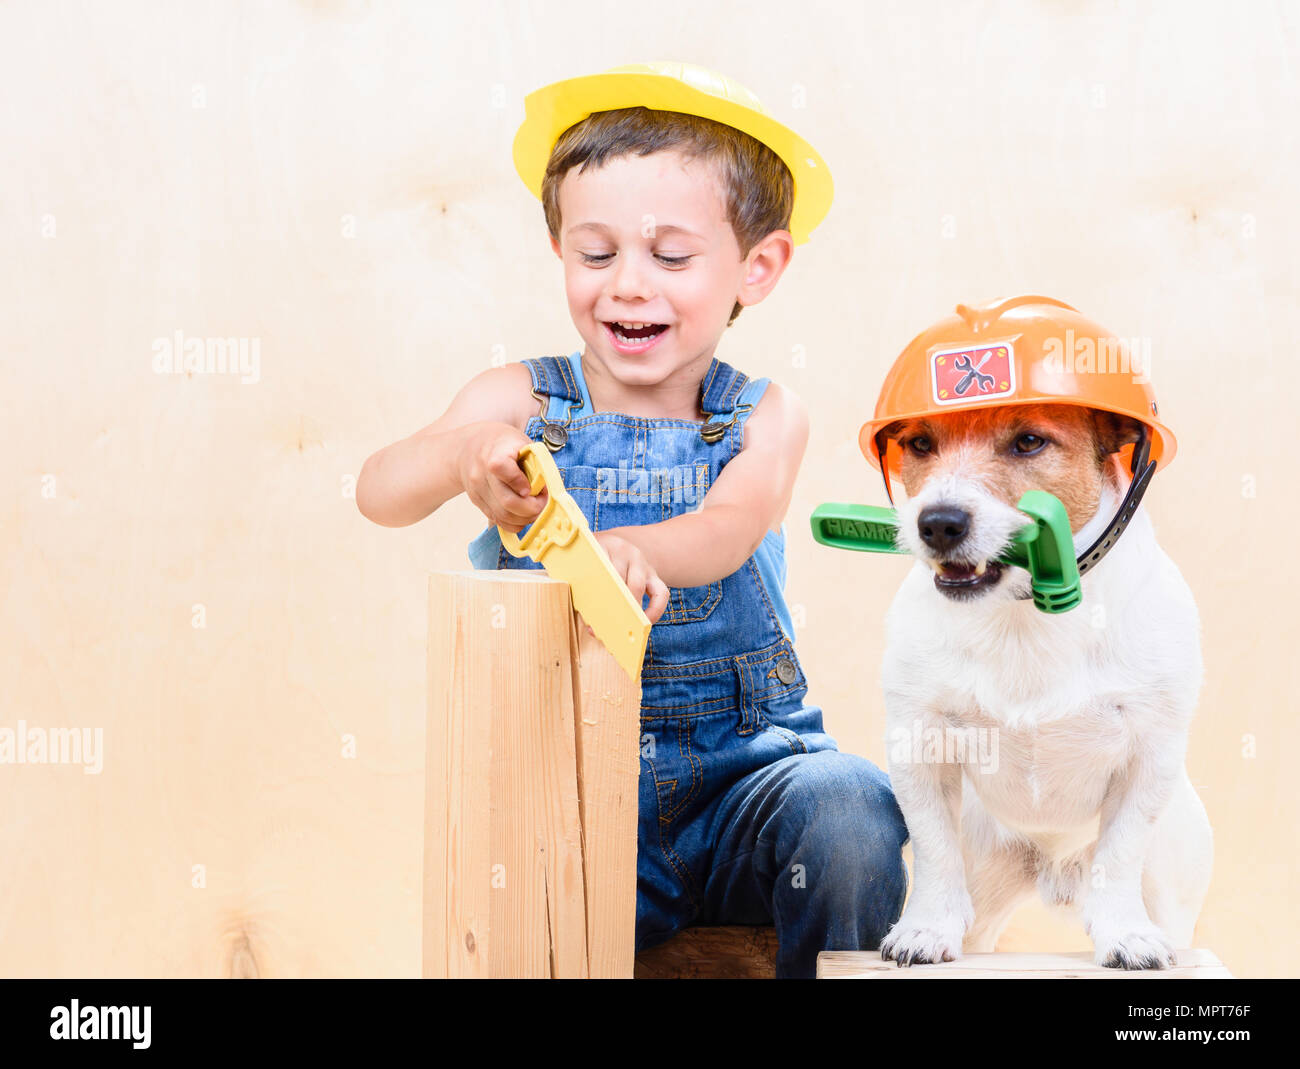 Kid and dog wearing hardhats working with saw and hammer at construction site Stock Photo